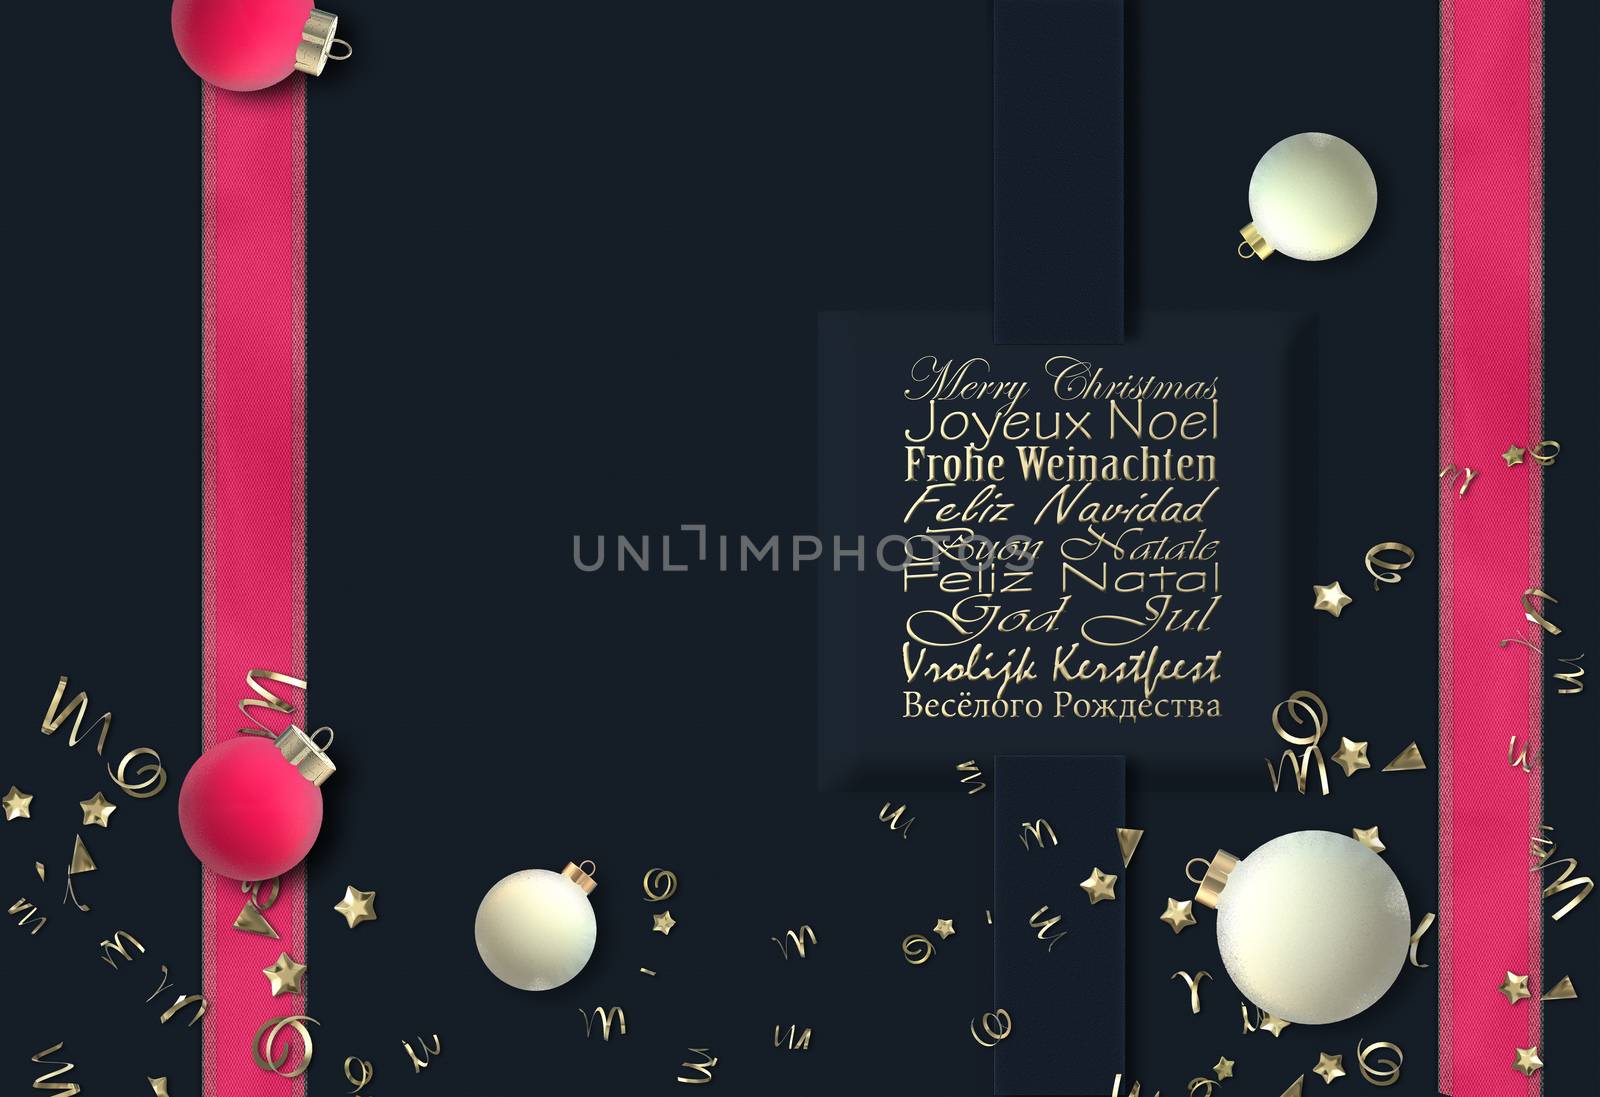 Luxury Christmas wishes in European languages by NelliPolk